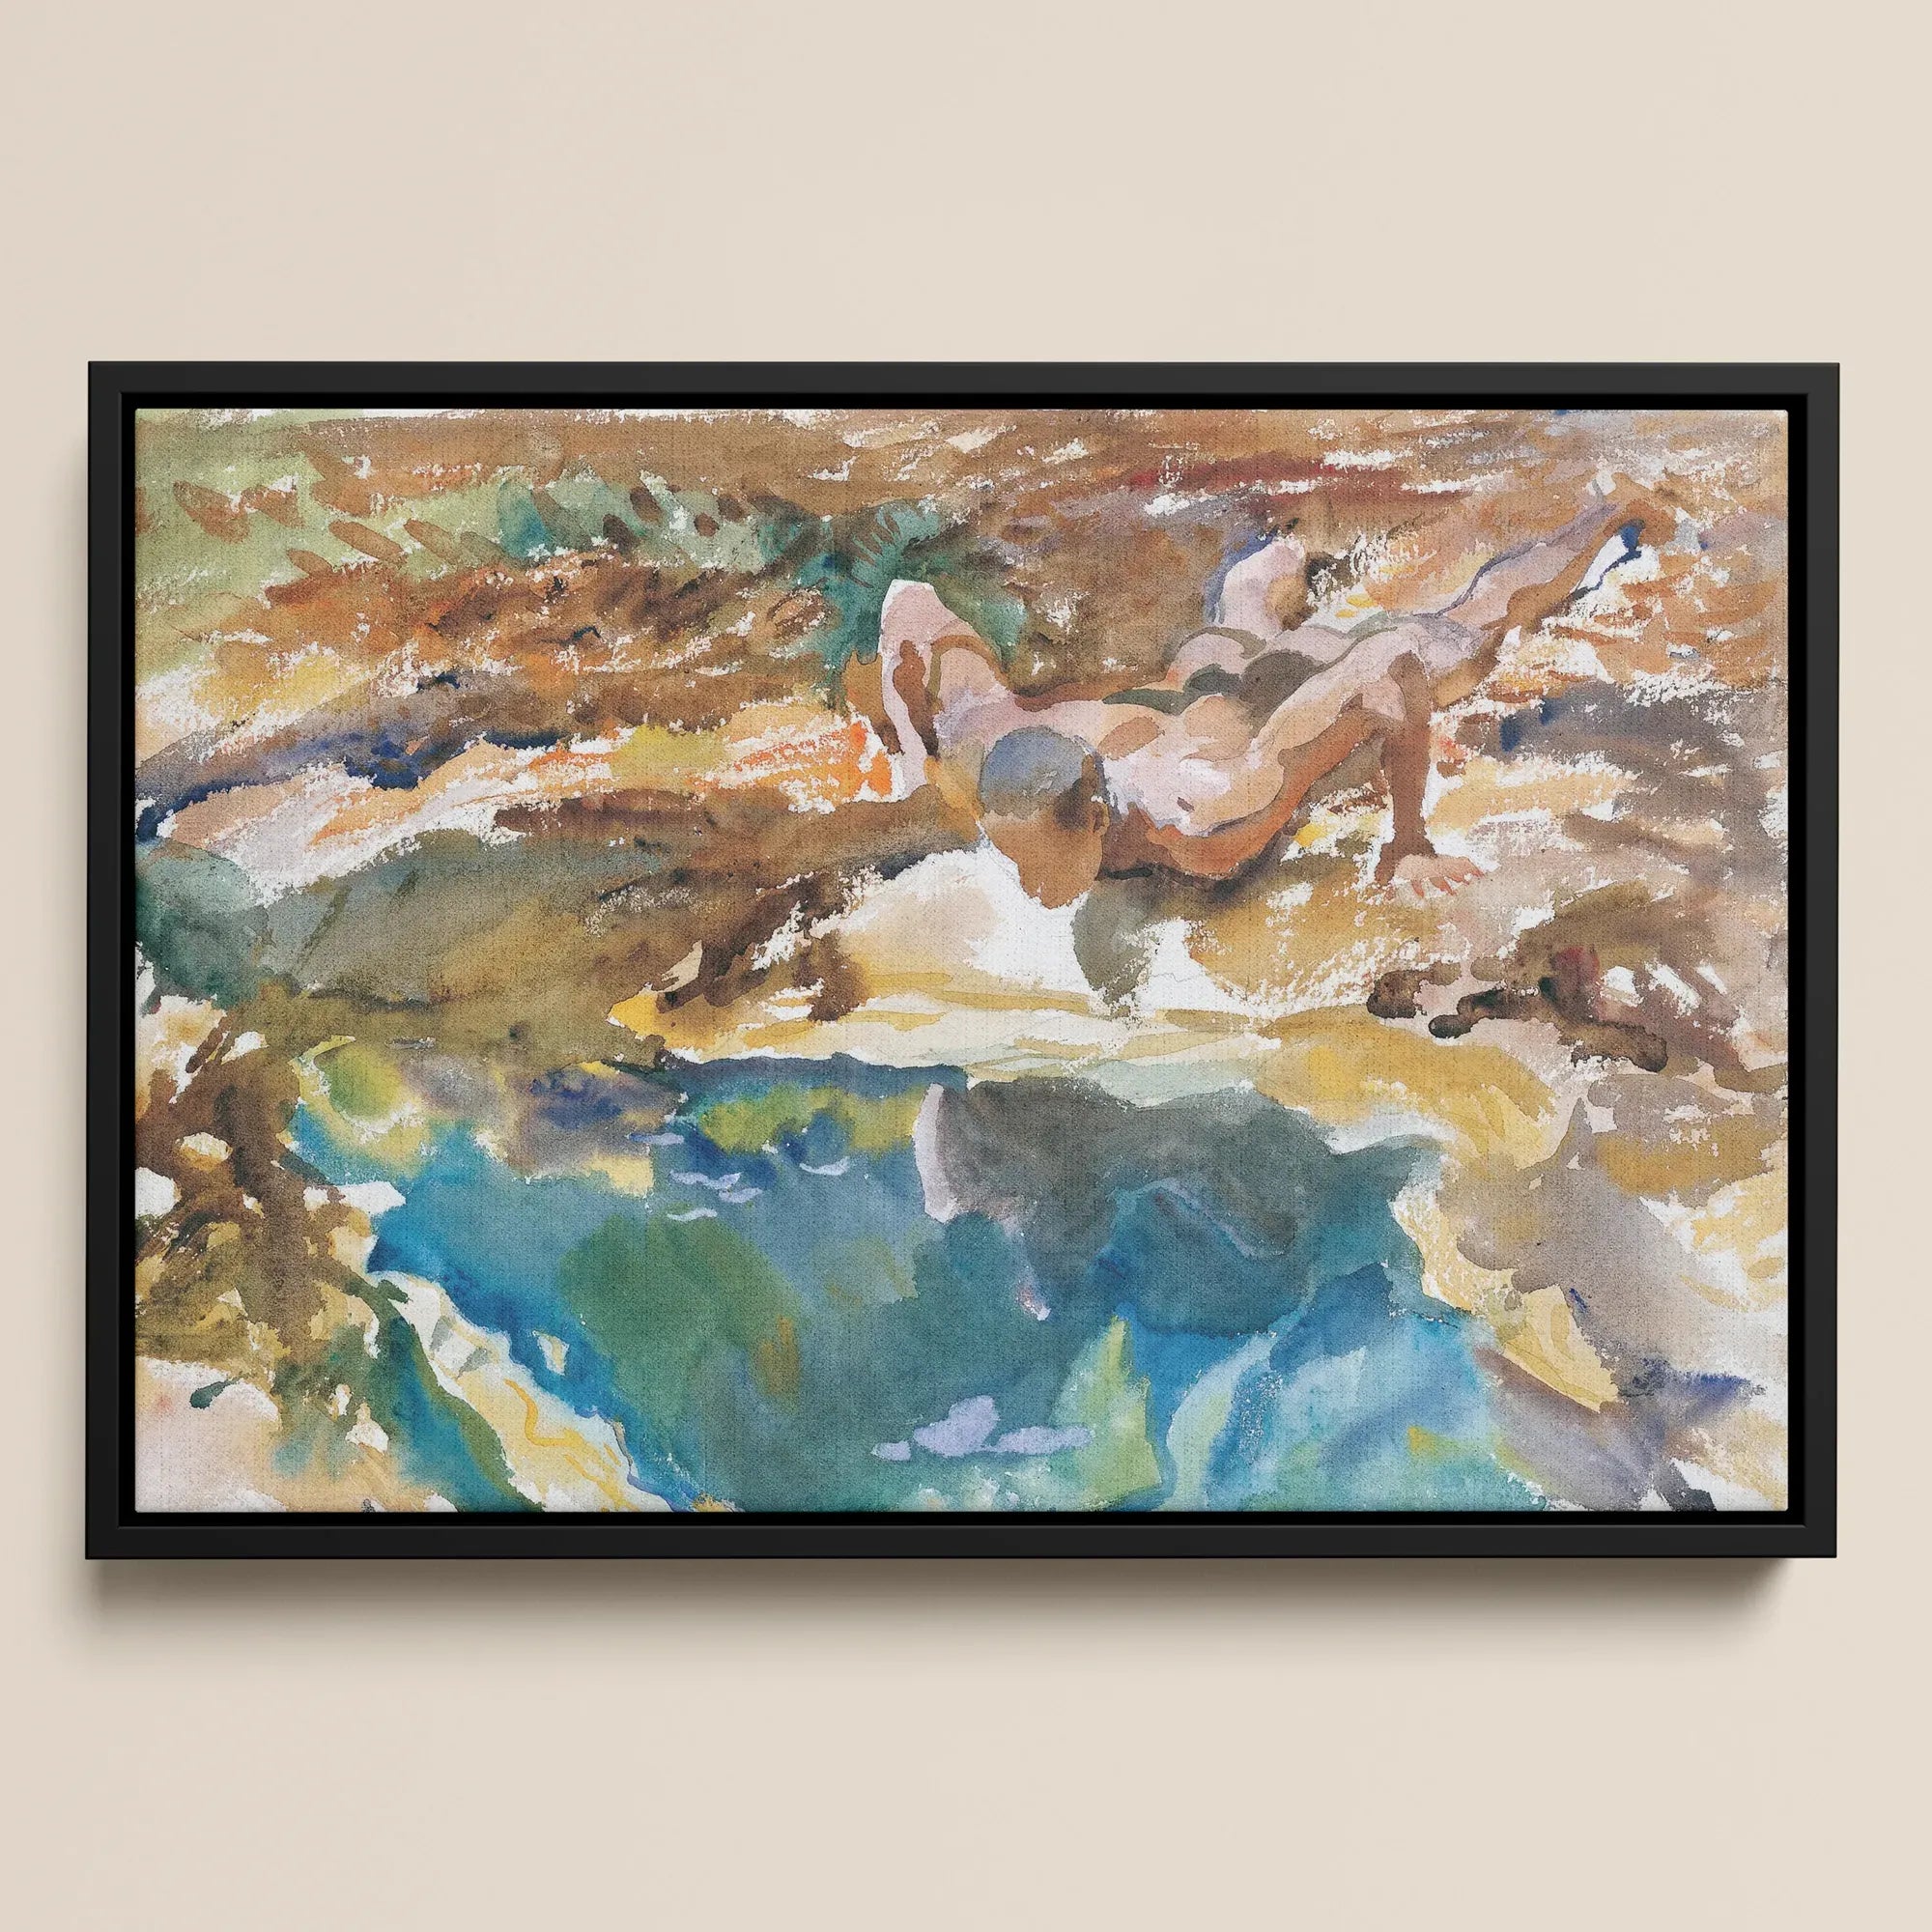 Man And Pool - John Singer Sargent Nude Male Framed Canvas - Posters Prints & Visual Artwork - Aesthetic Art